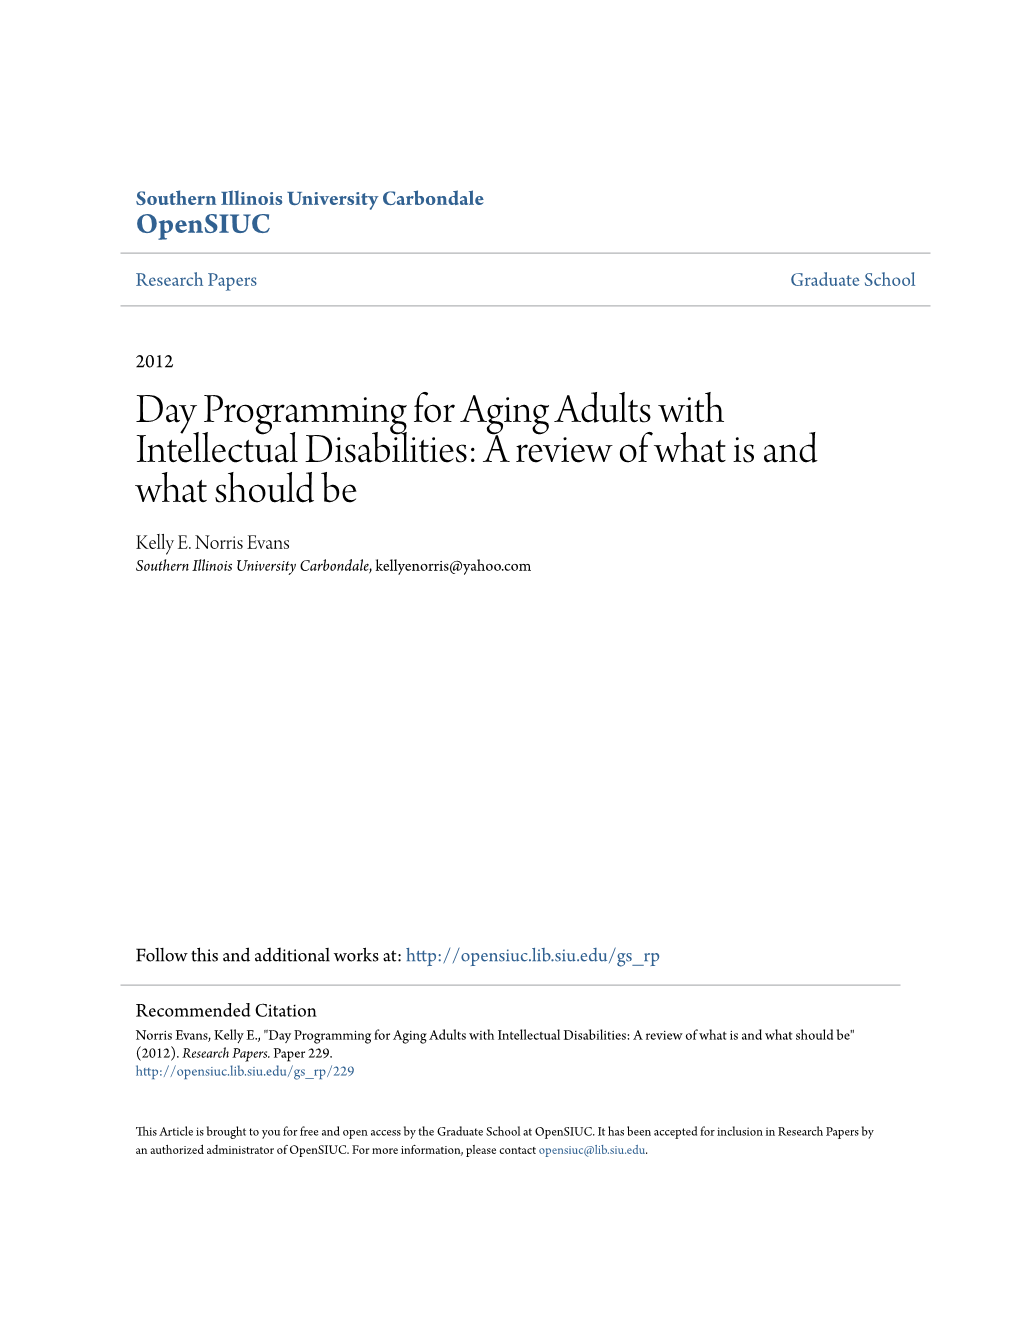 Day Programming for Aging Adults with Intellectual Disabilities: a Review of What Is and What Should Be Kelly E